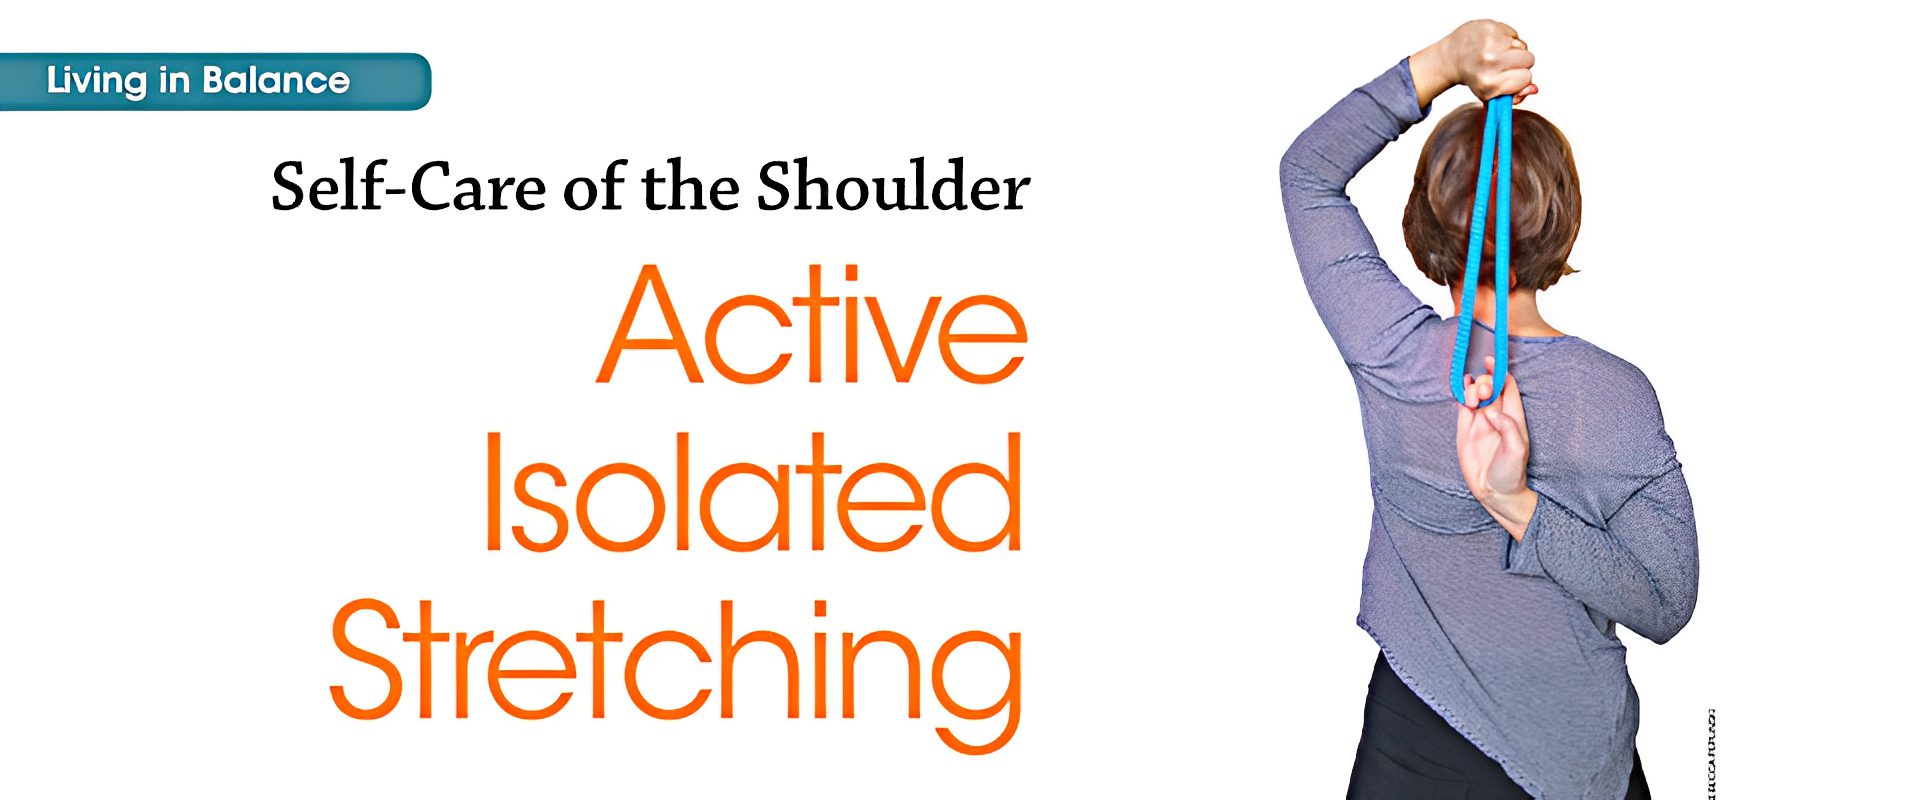 Isolated stretching